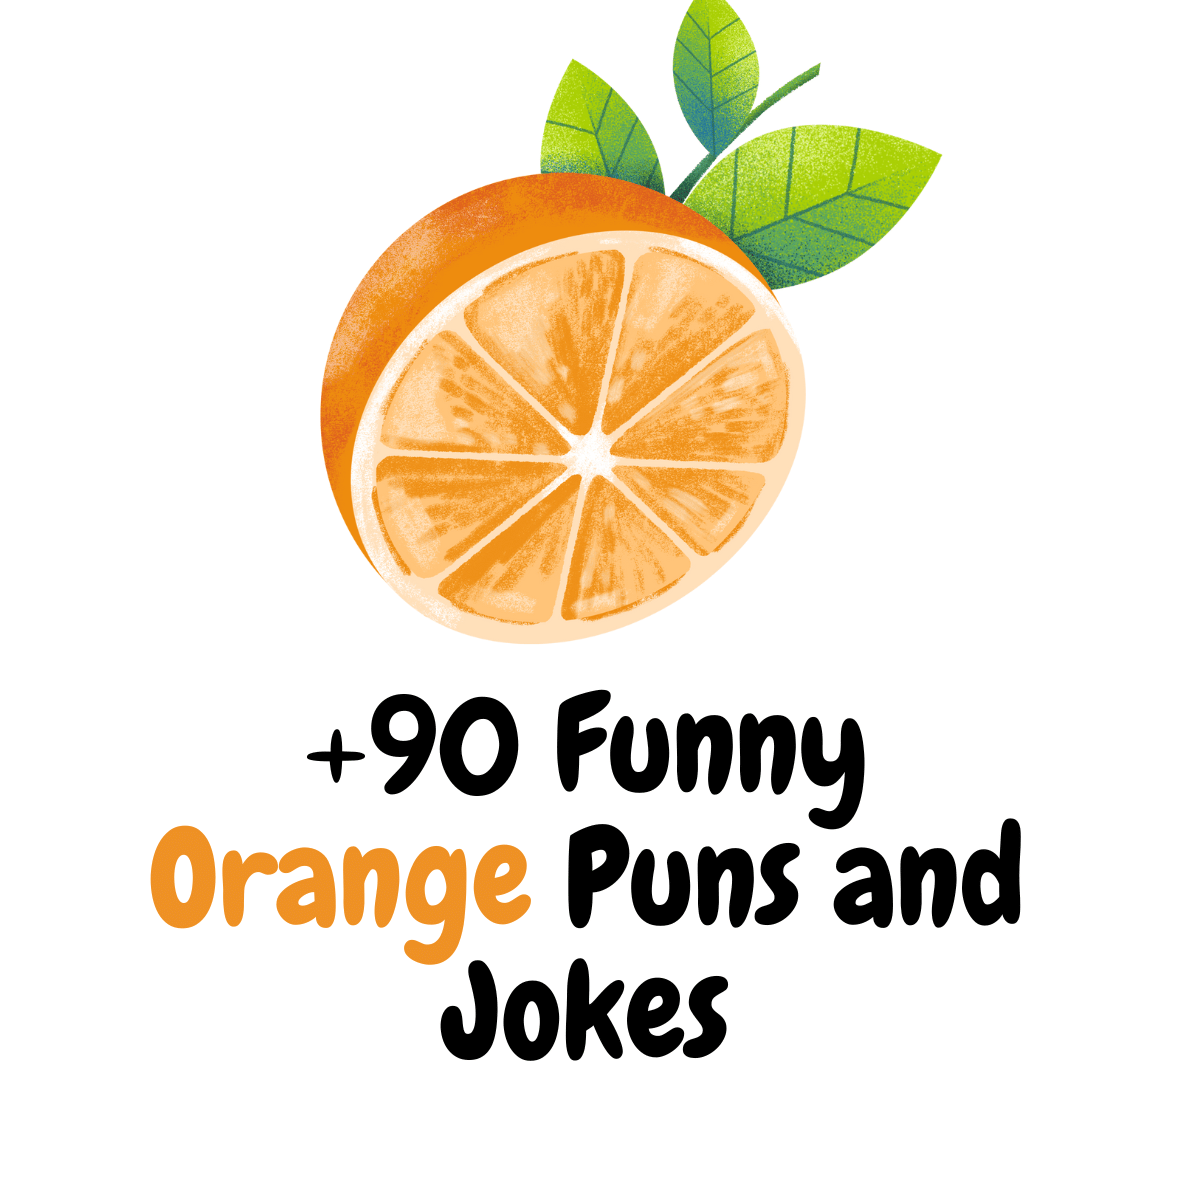 Orange Puns and Jokes: A Playful Collection of Citrus Humor